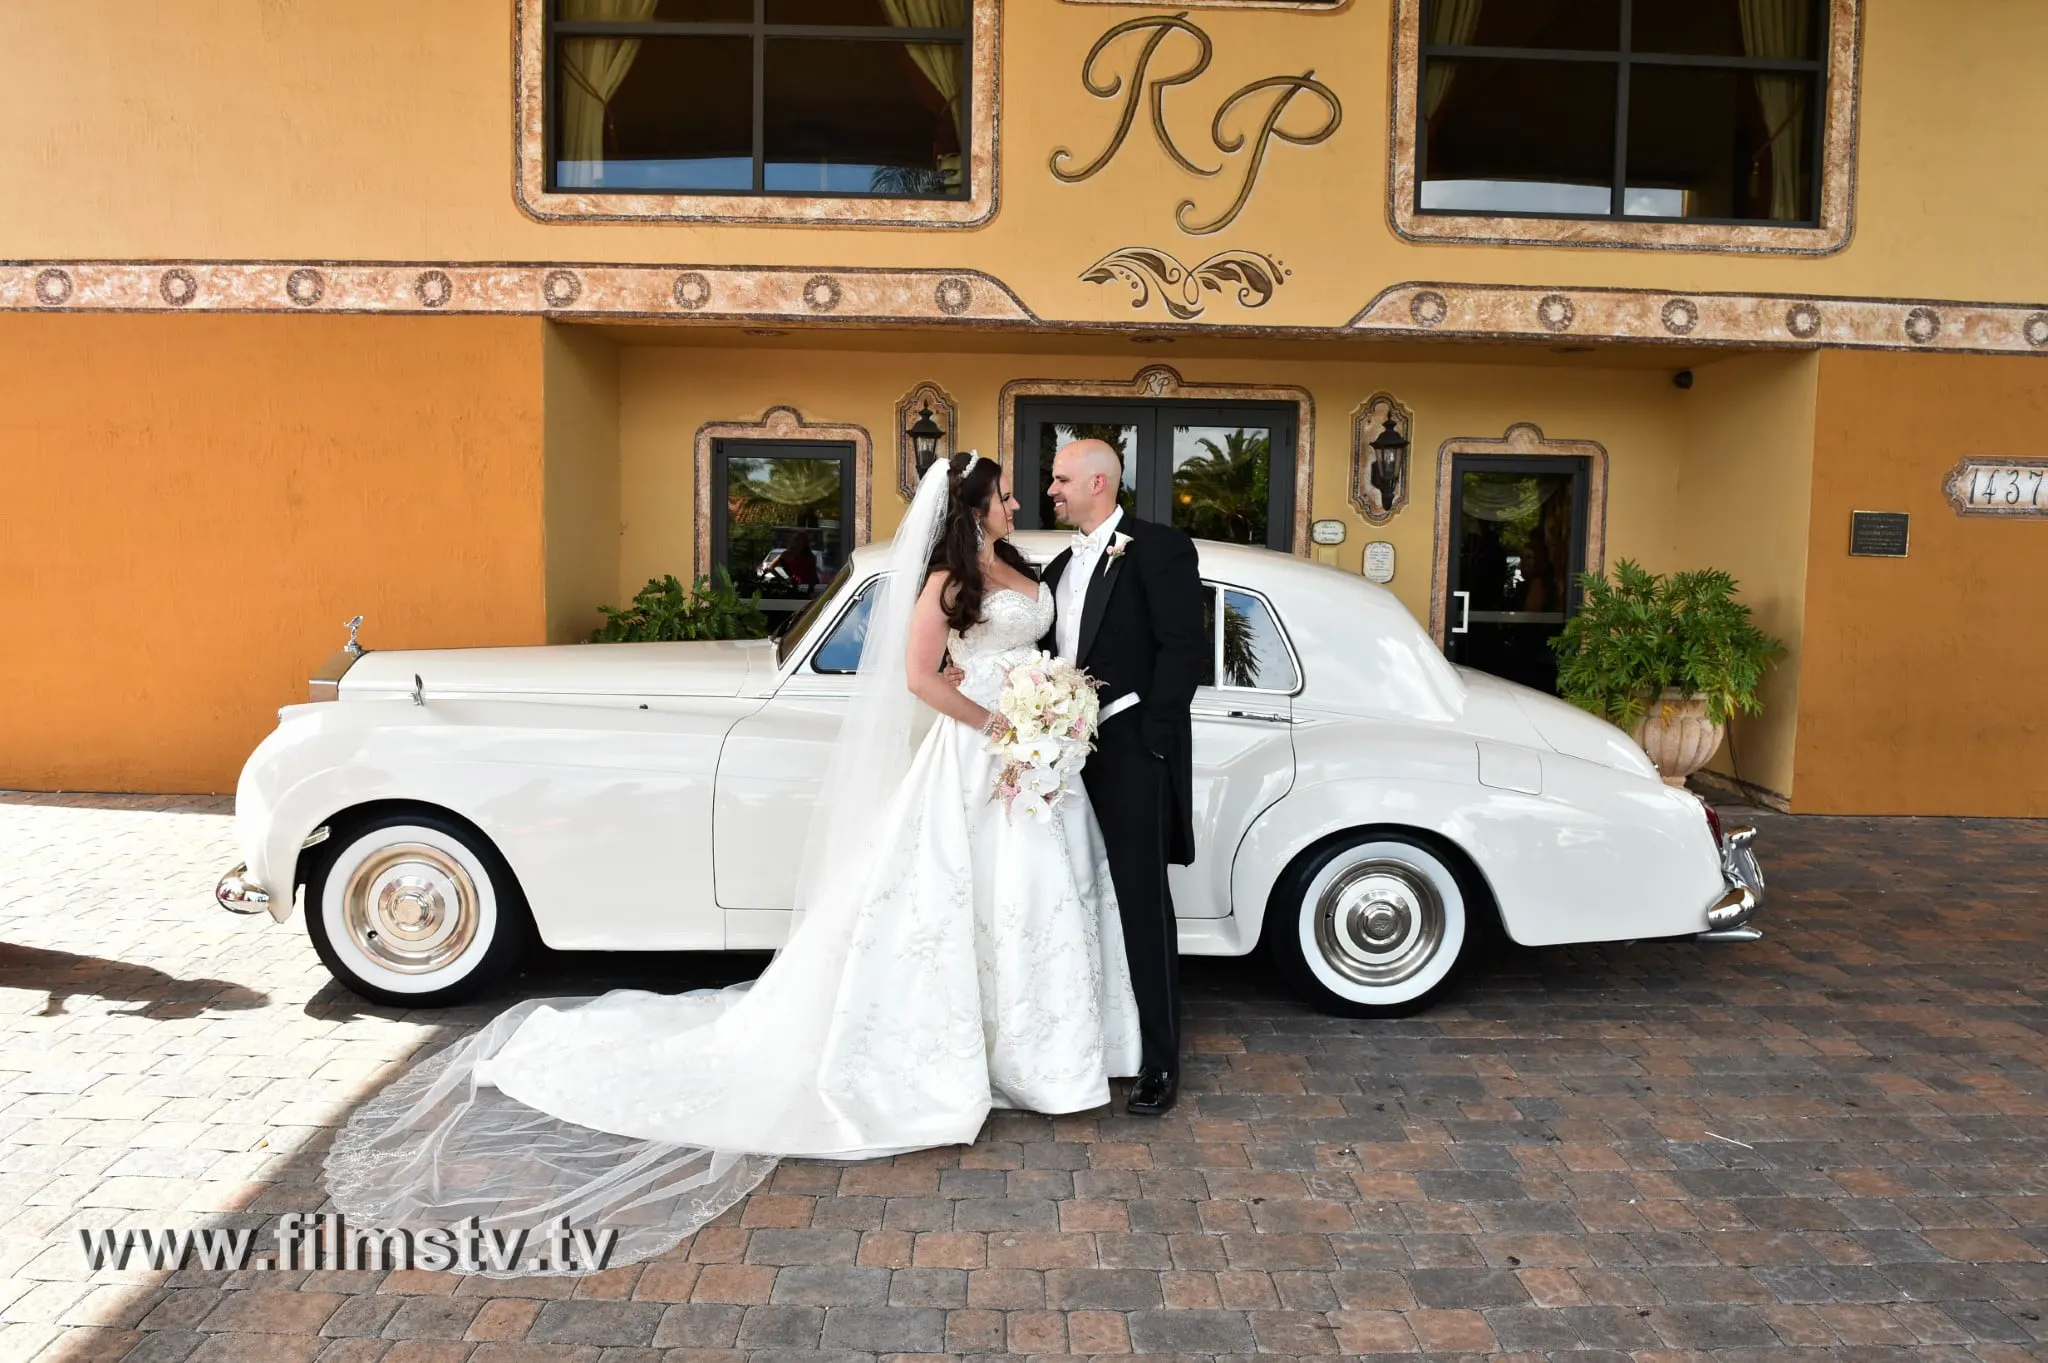 A bride and groom posing in front of a classic car.